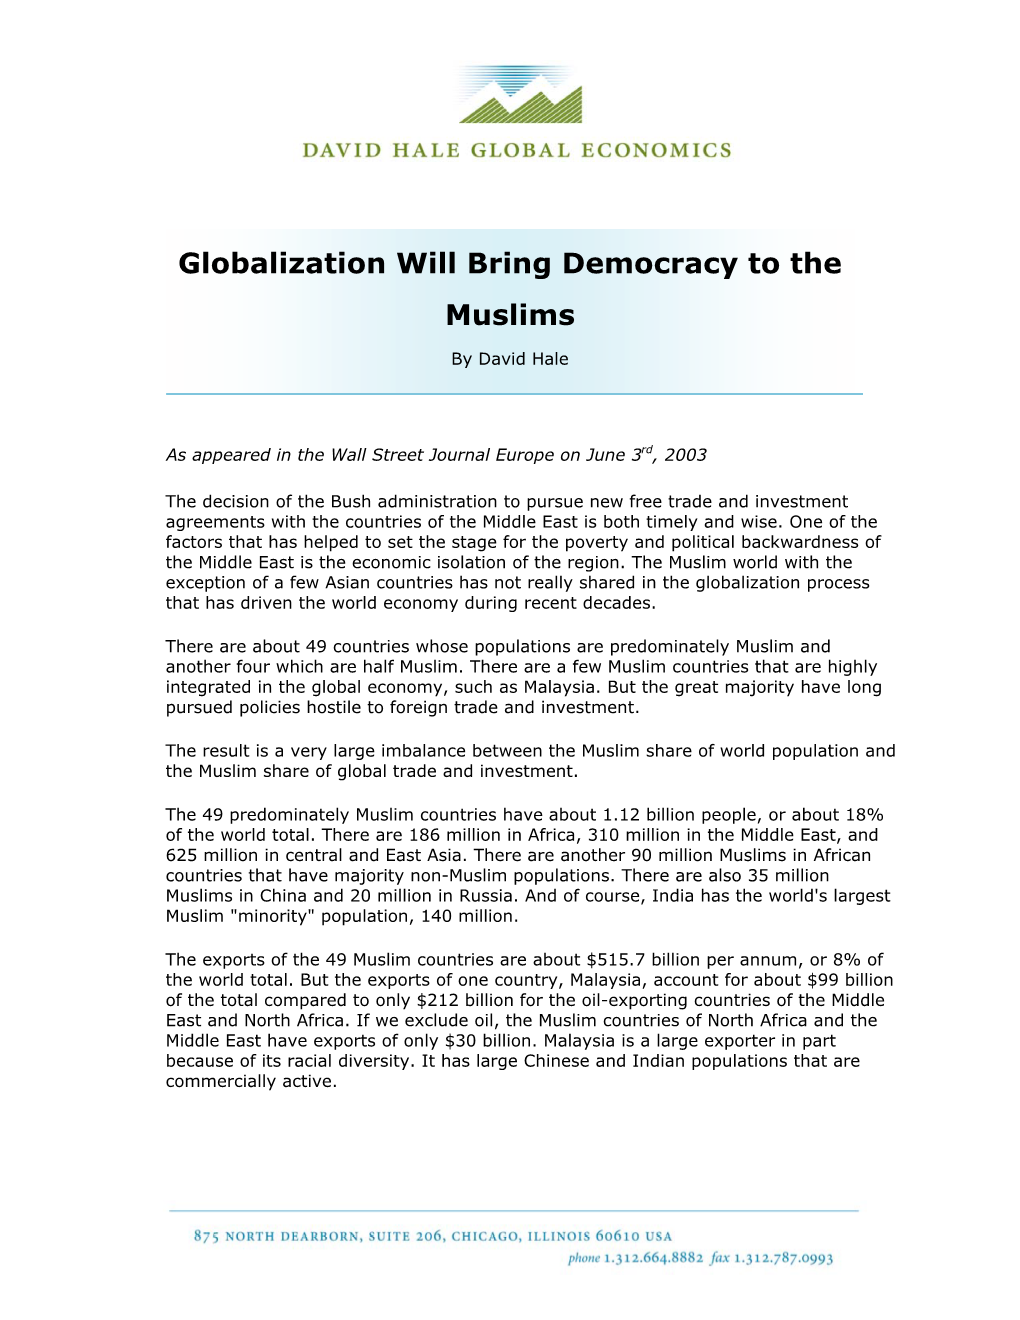 Globalization Will Bring Democracy to the Muslims